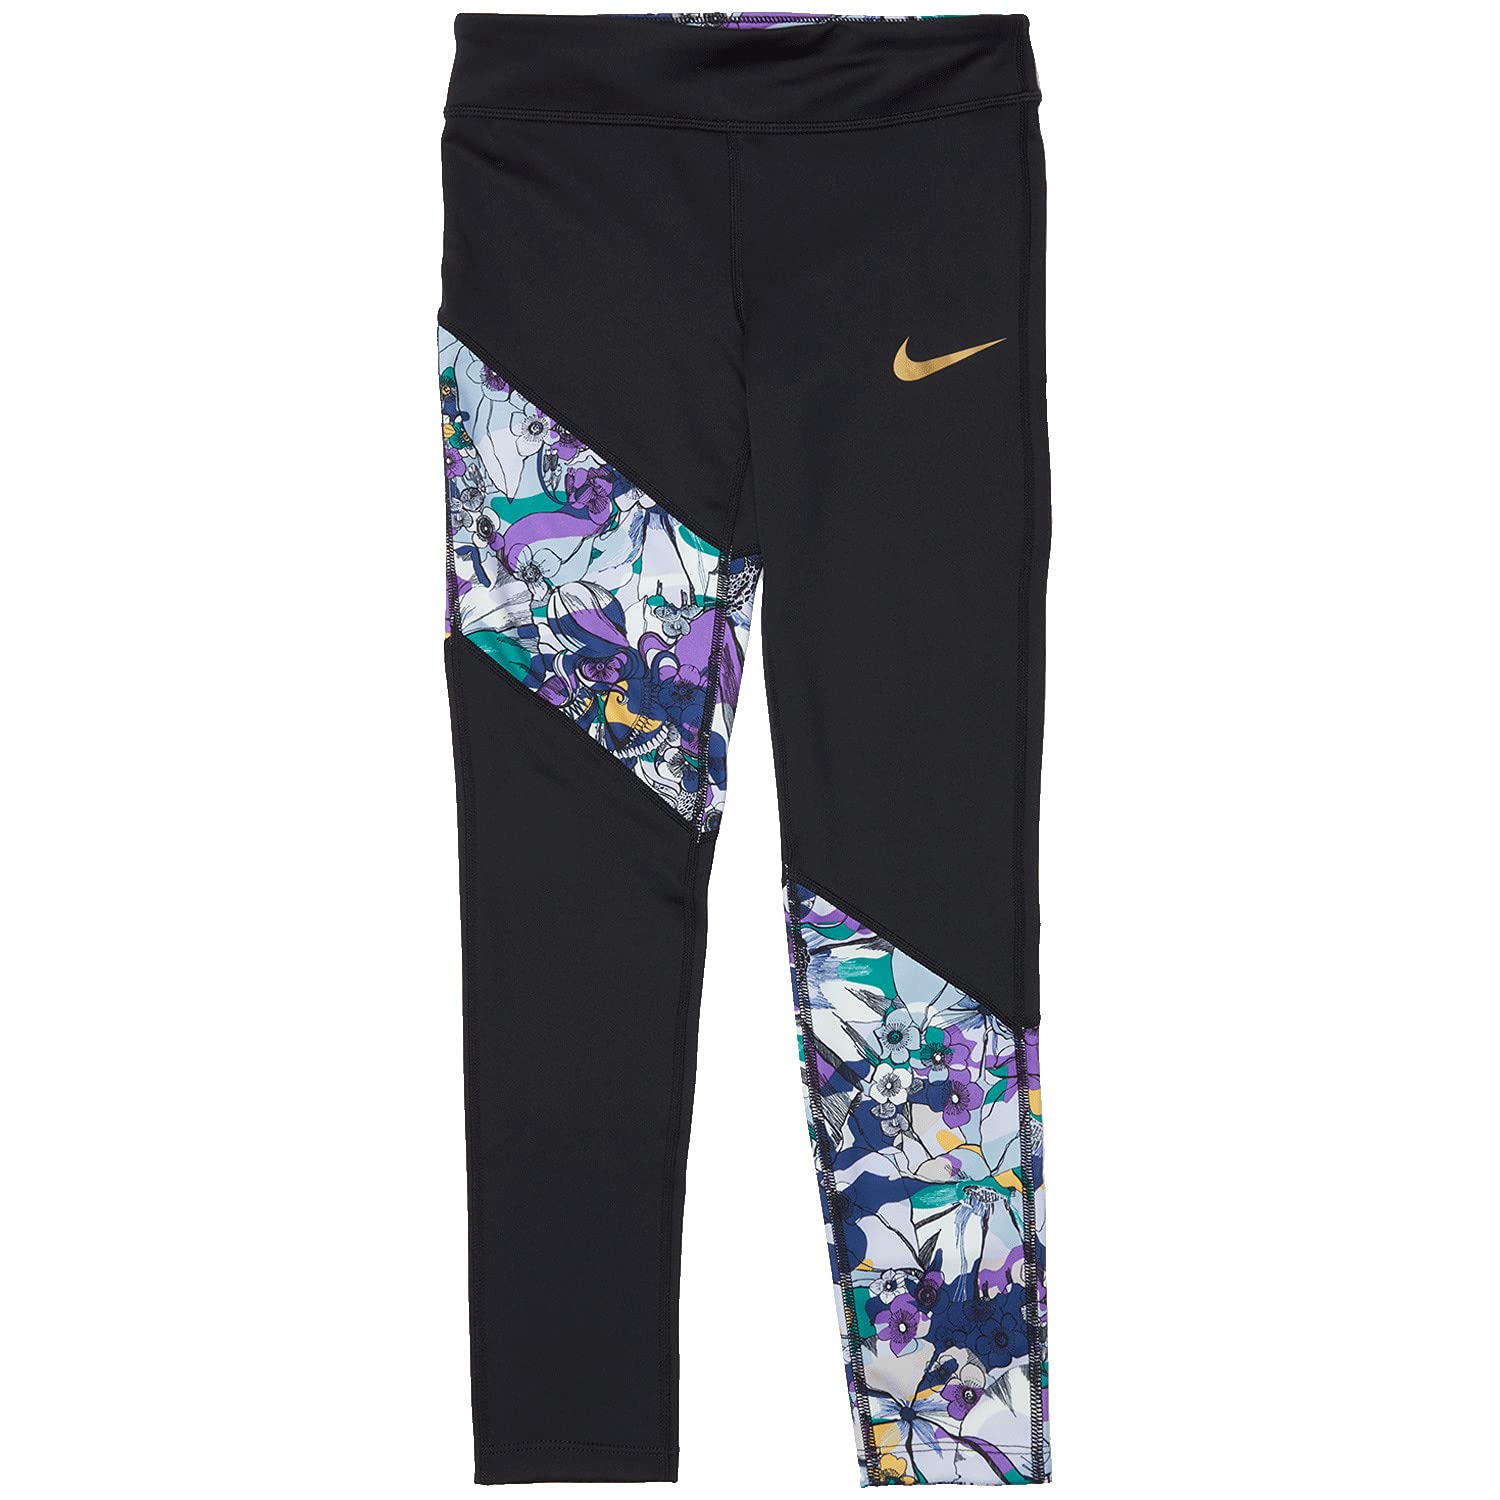 Image 1 of Dri-FIT™ One Tights Energy (Little Kids/Big Kids)